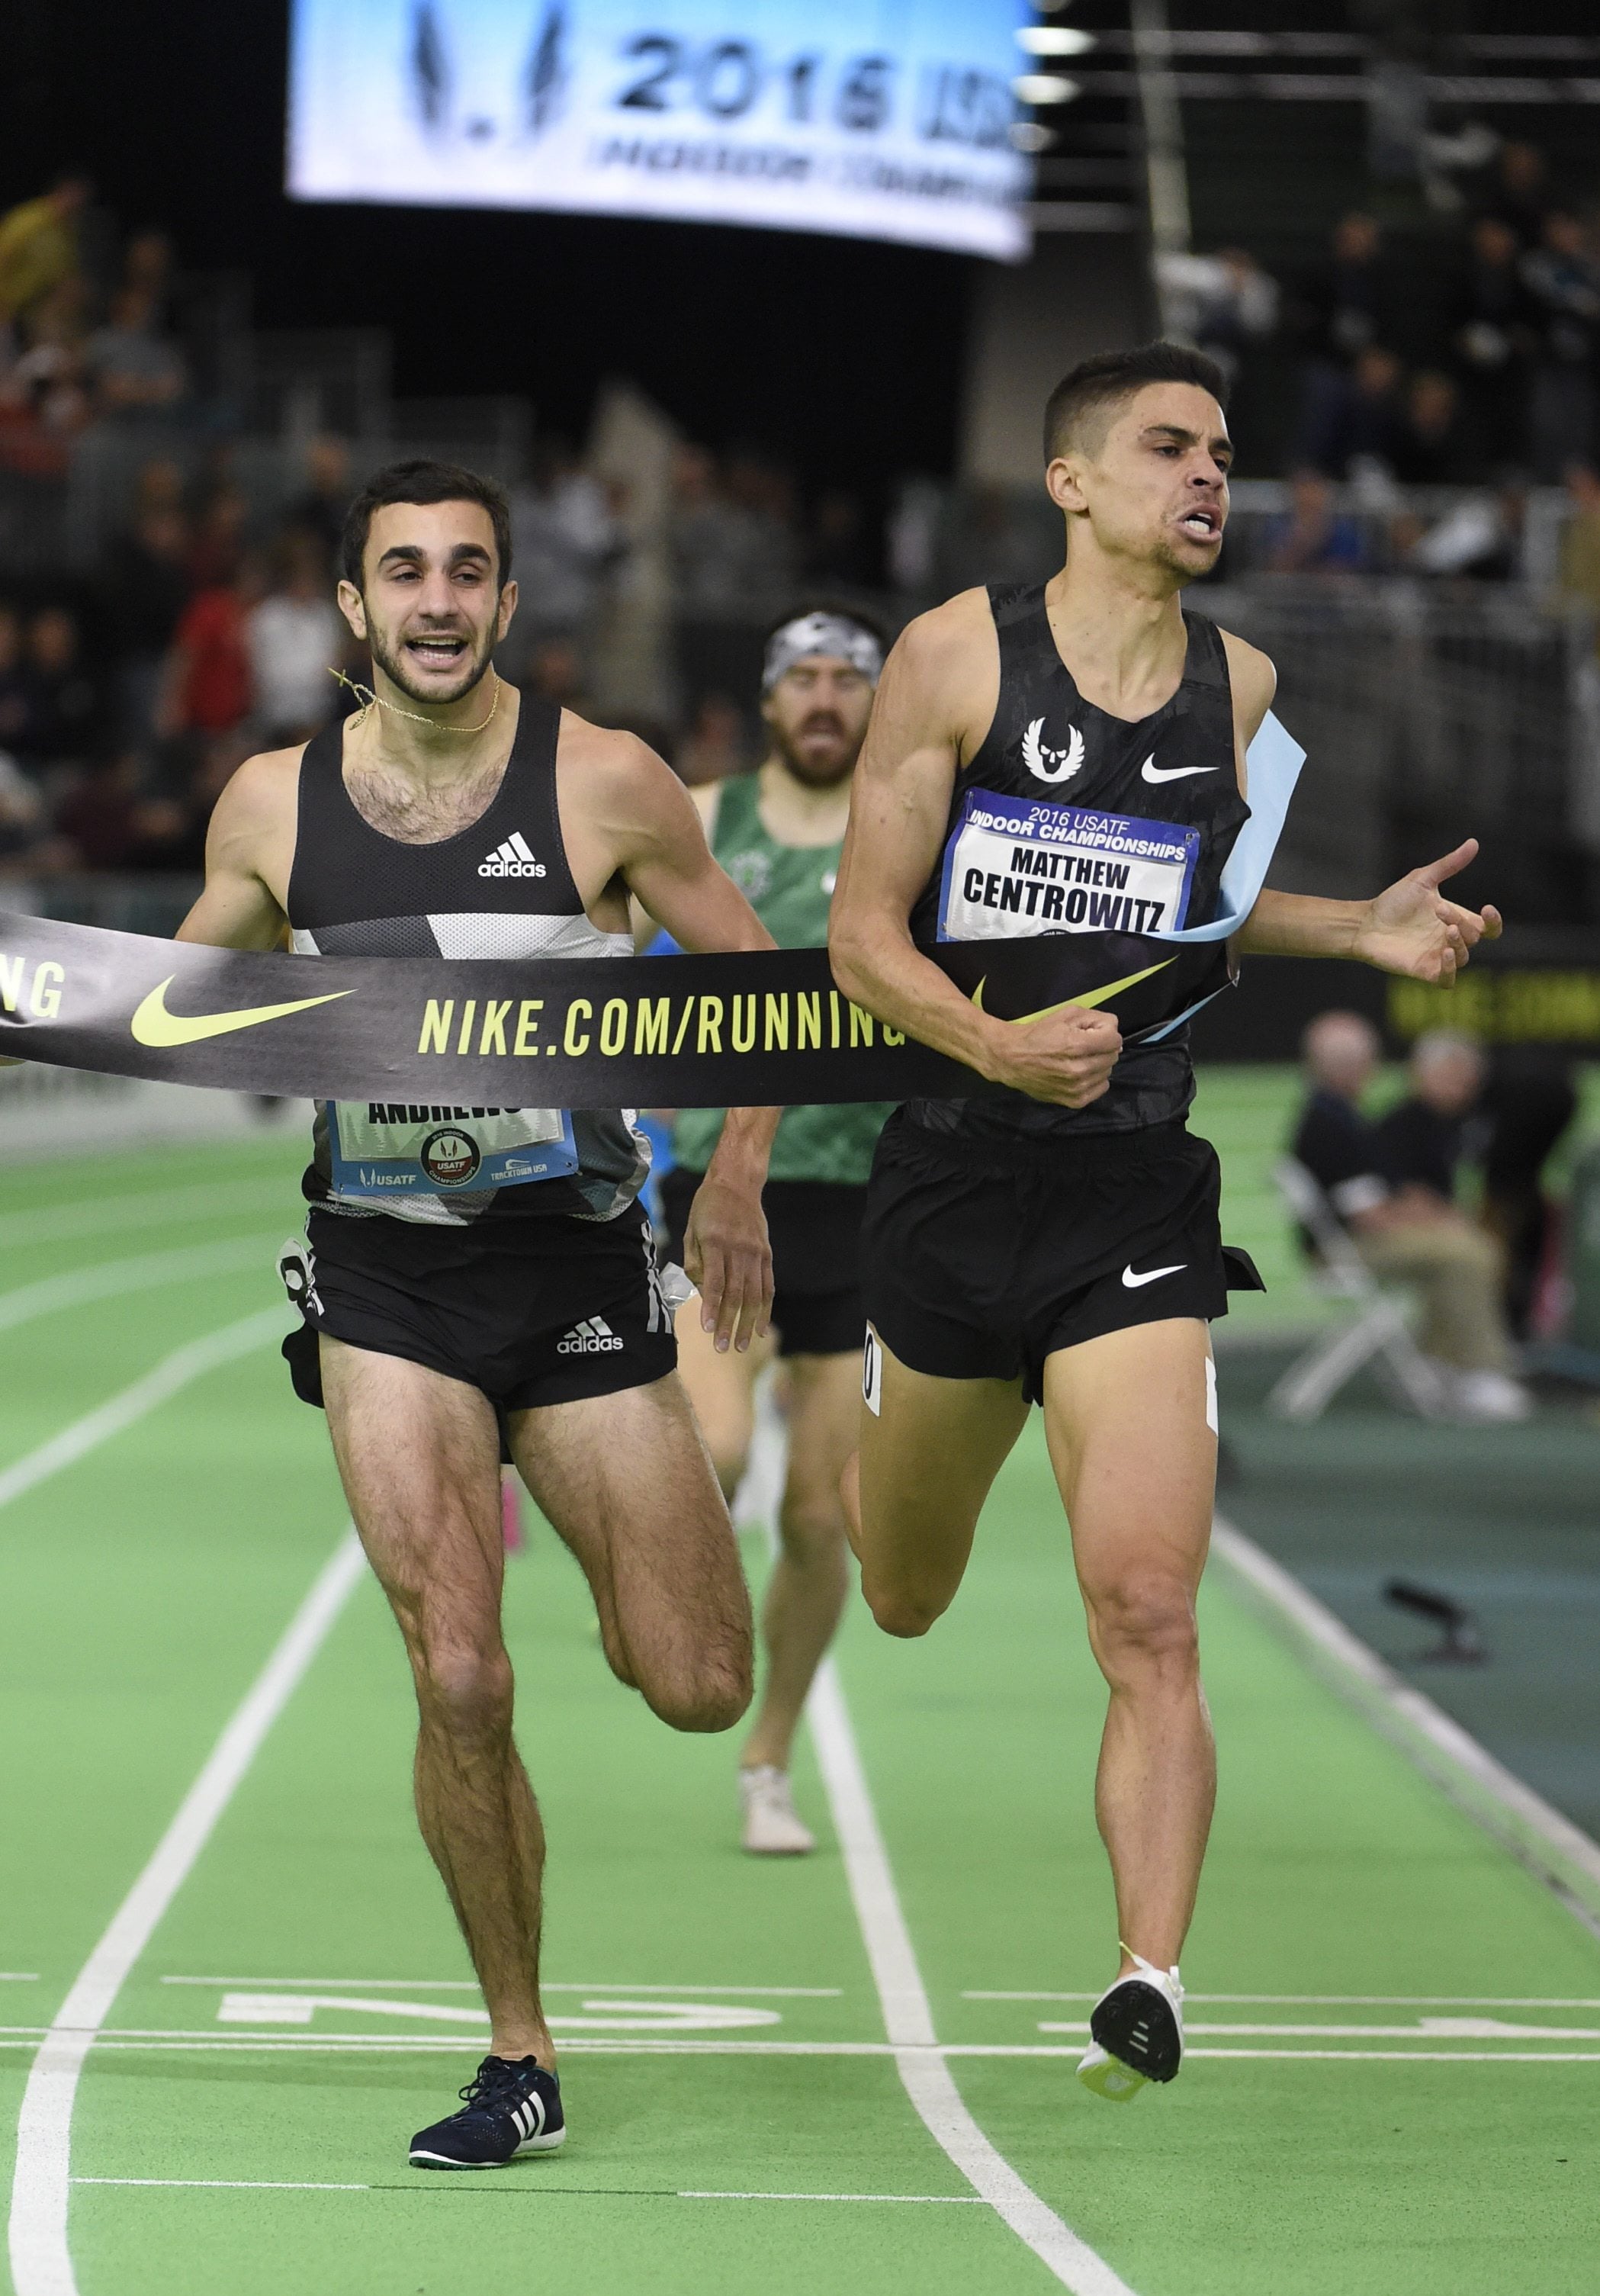 Matthew Centrowitz, on right, breaks the tape ahead of Robby Andrews to with the men&#039;s 1500 meters at the U.S. indoor track and field championships in Portland, Ore., Saturday, March 12, 2016.